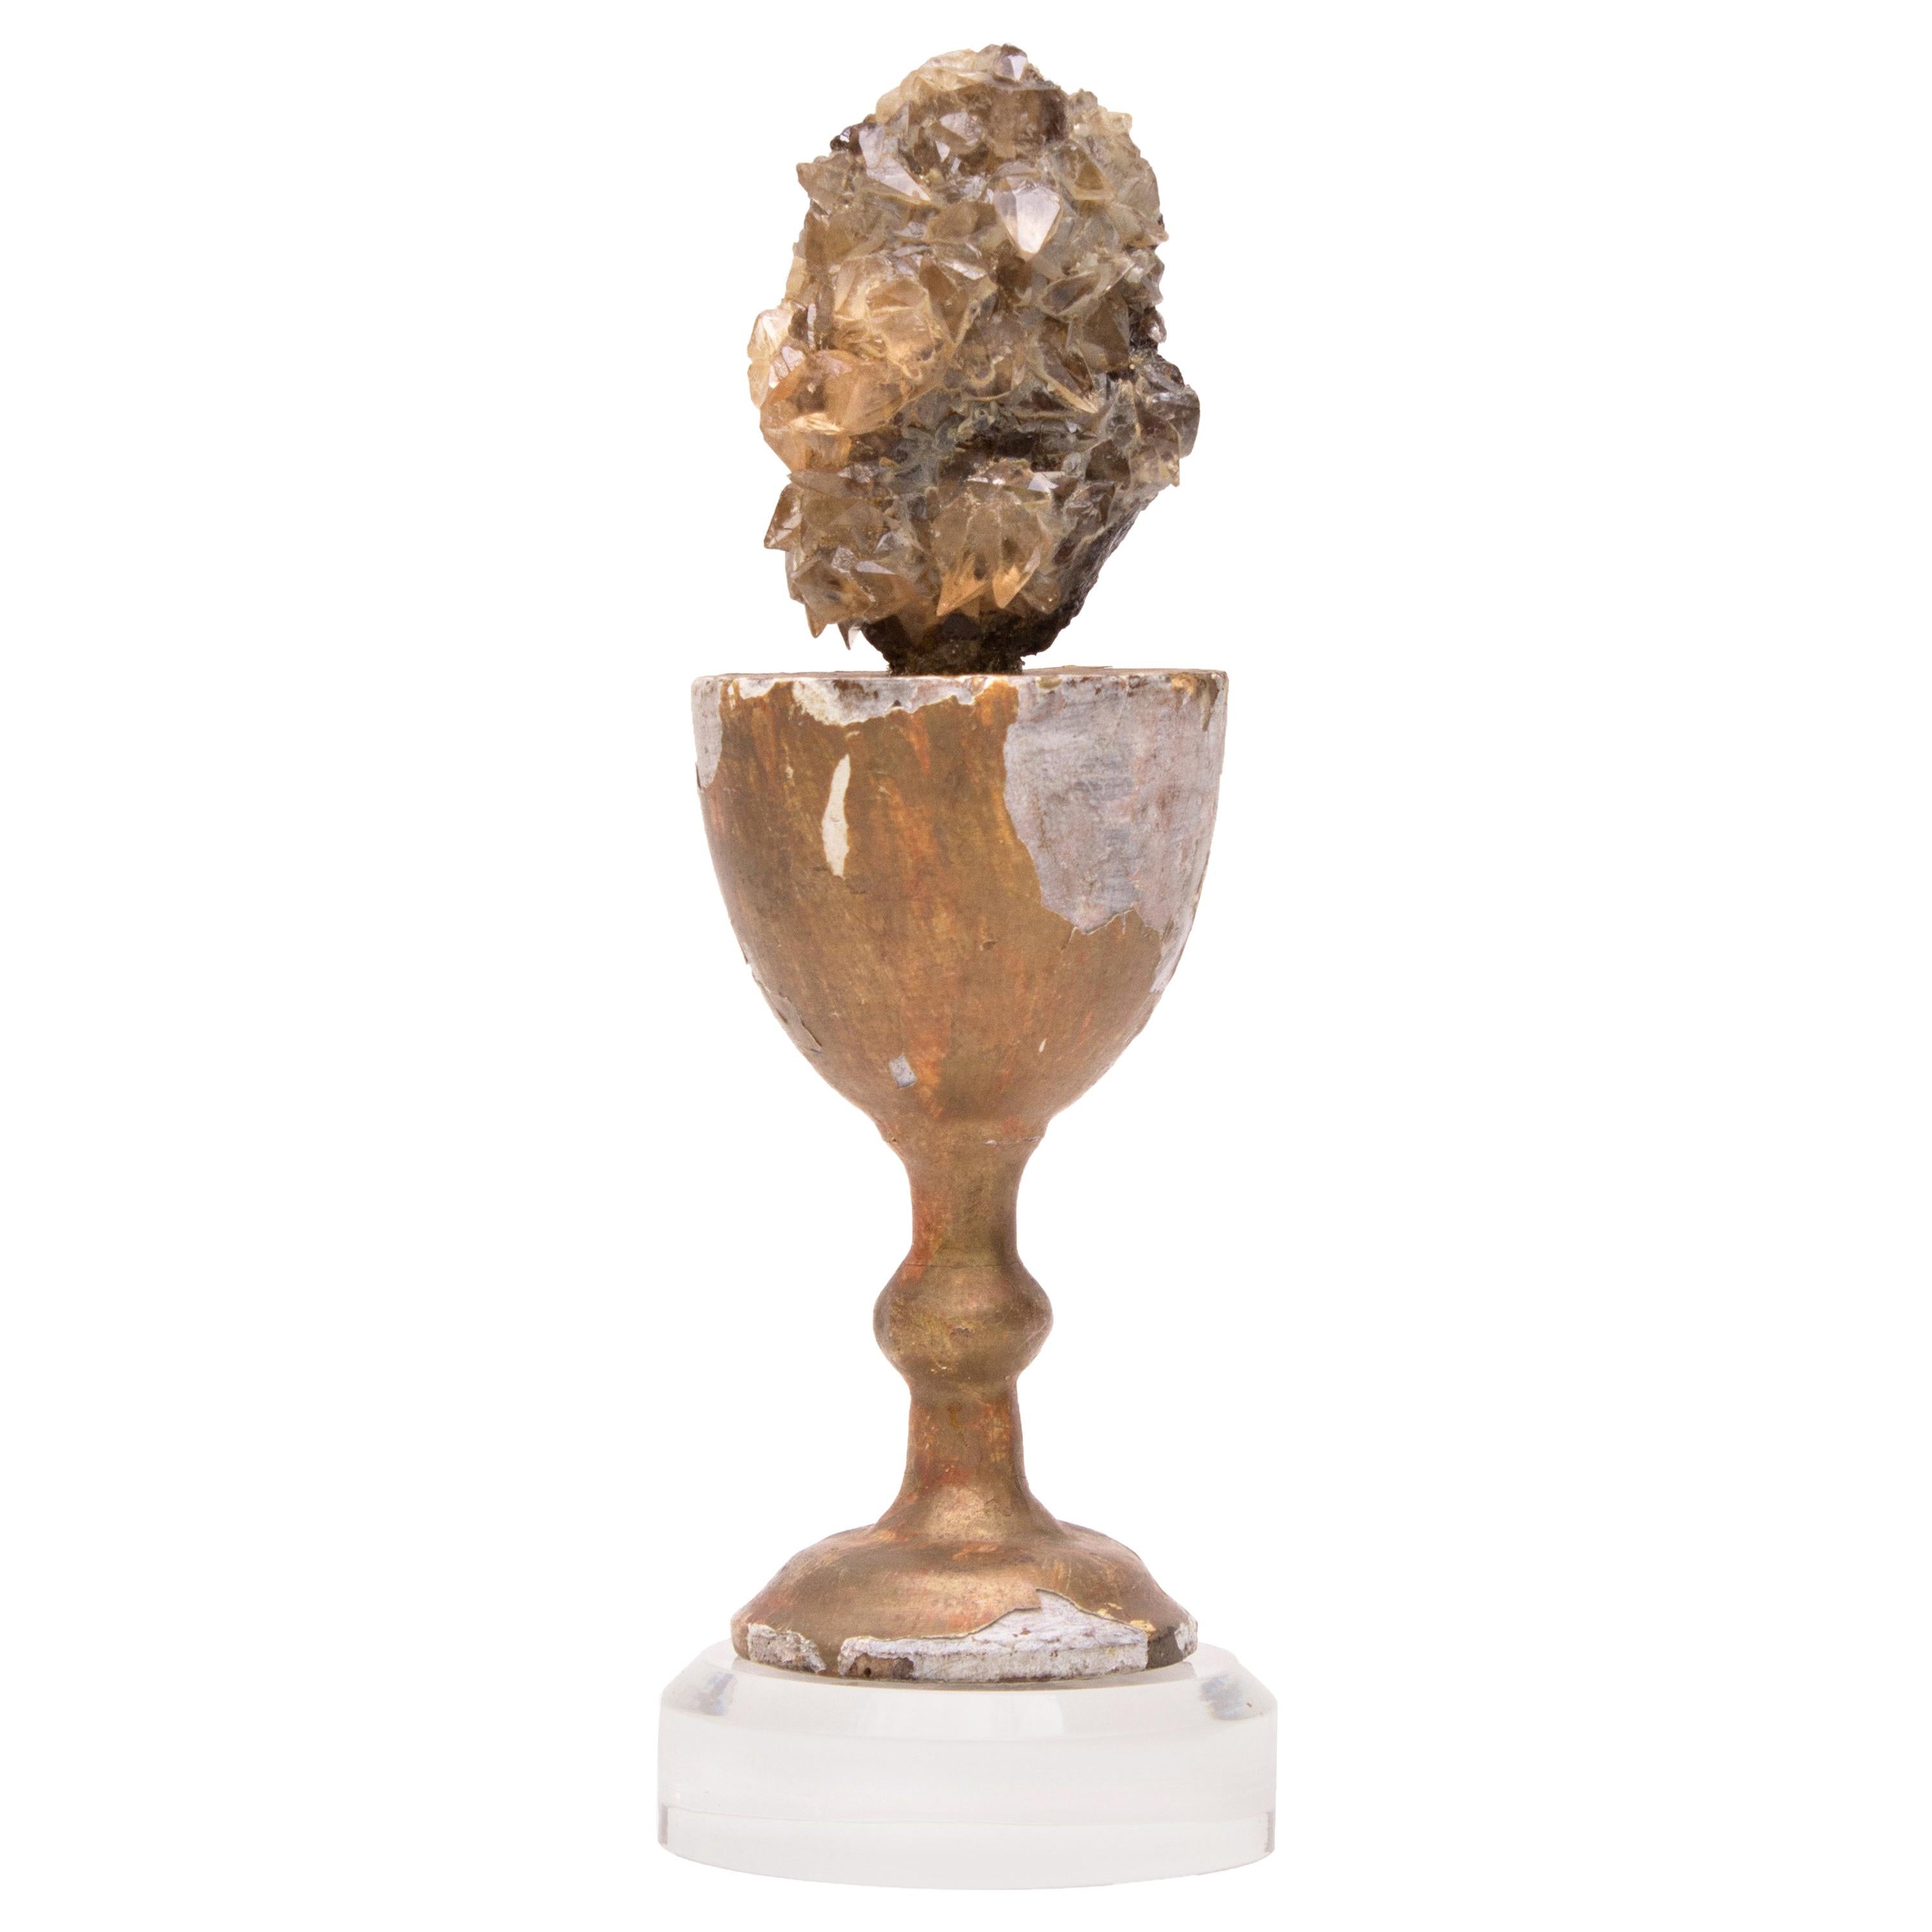 Sculptural 18th Century Chalice with Calcite Crystals in Sphalerite on Lucite